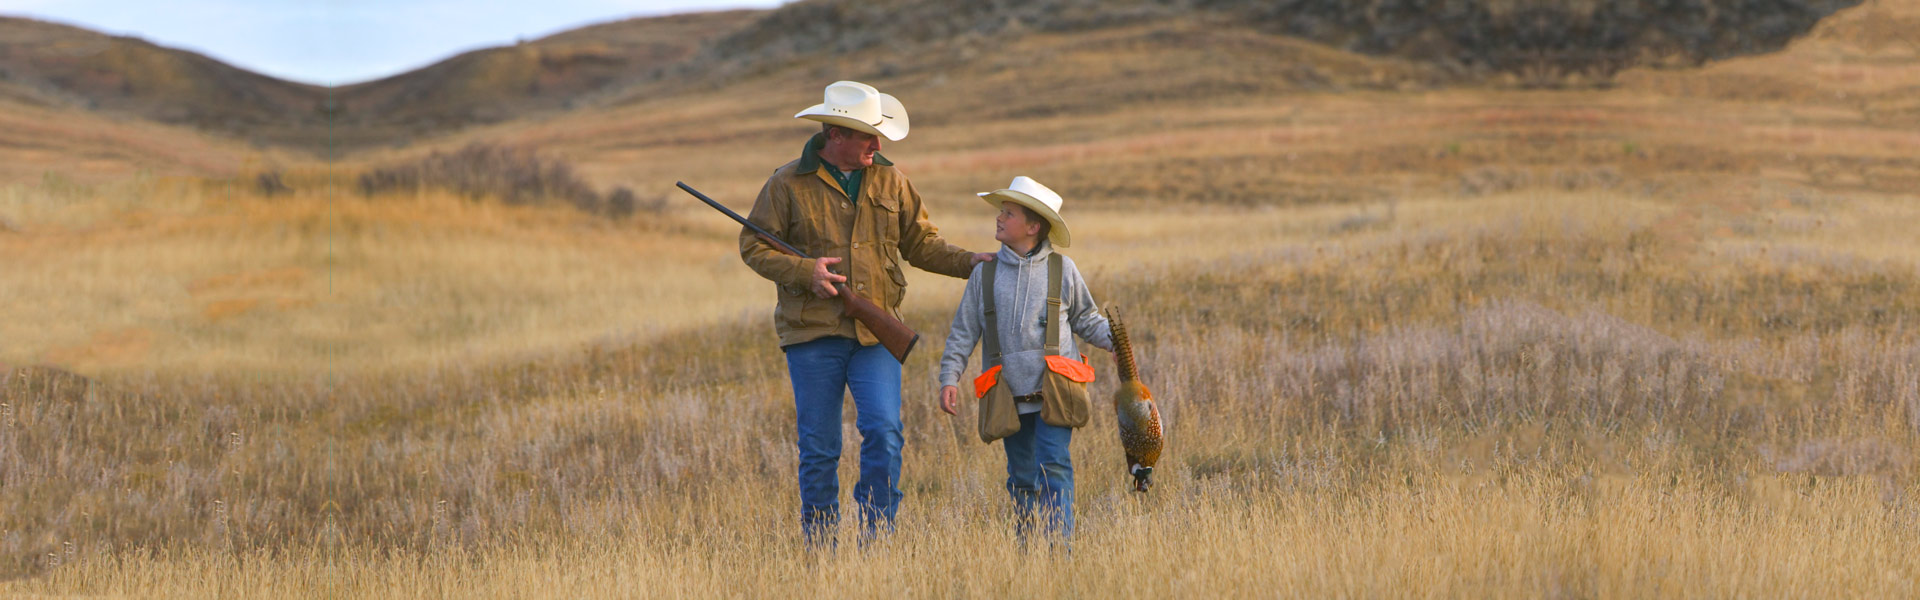 Upland game bird hunters in the field